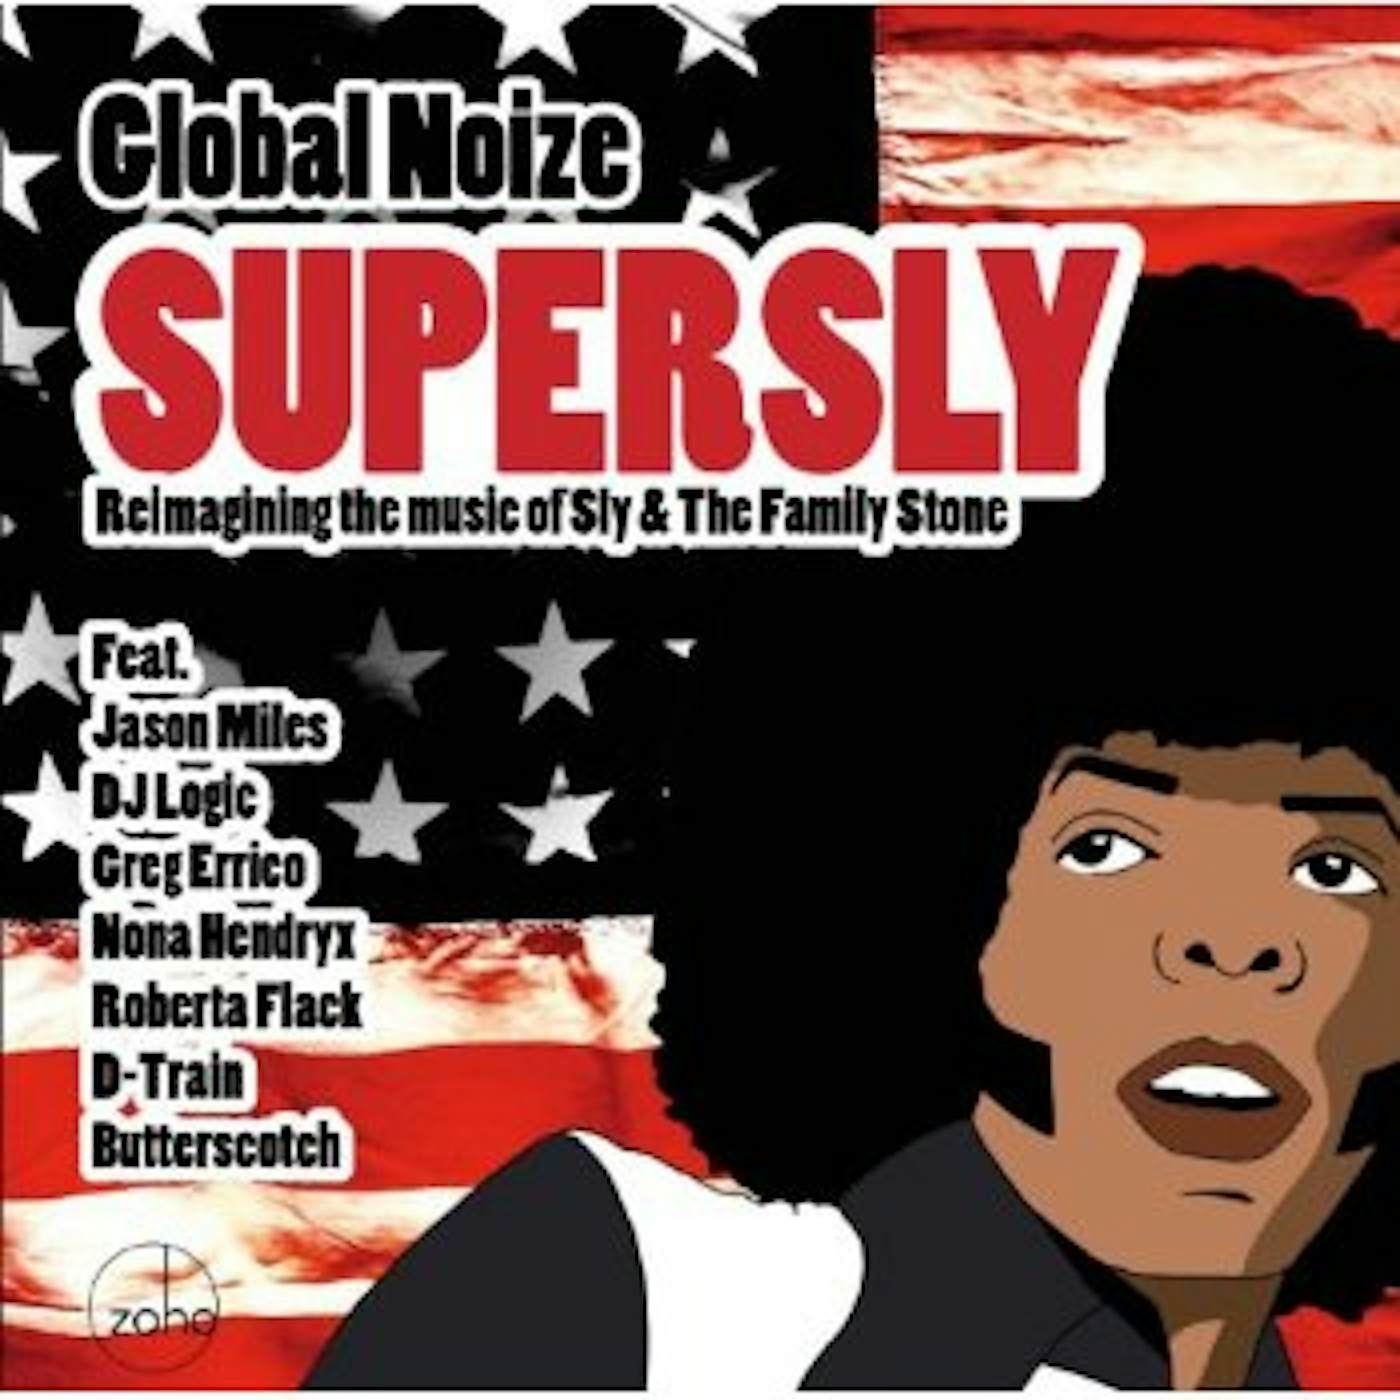 Global Noize SUPERSLY:REIMAGINING THE MUSIC OF SLY & THE FAMILY CD